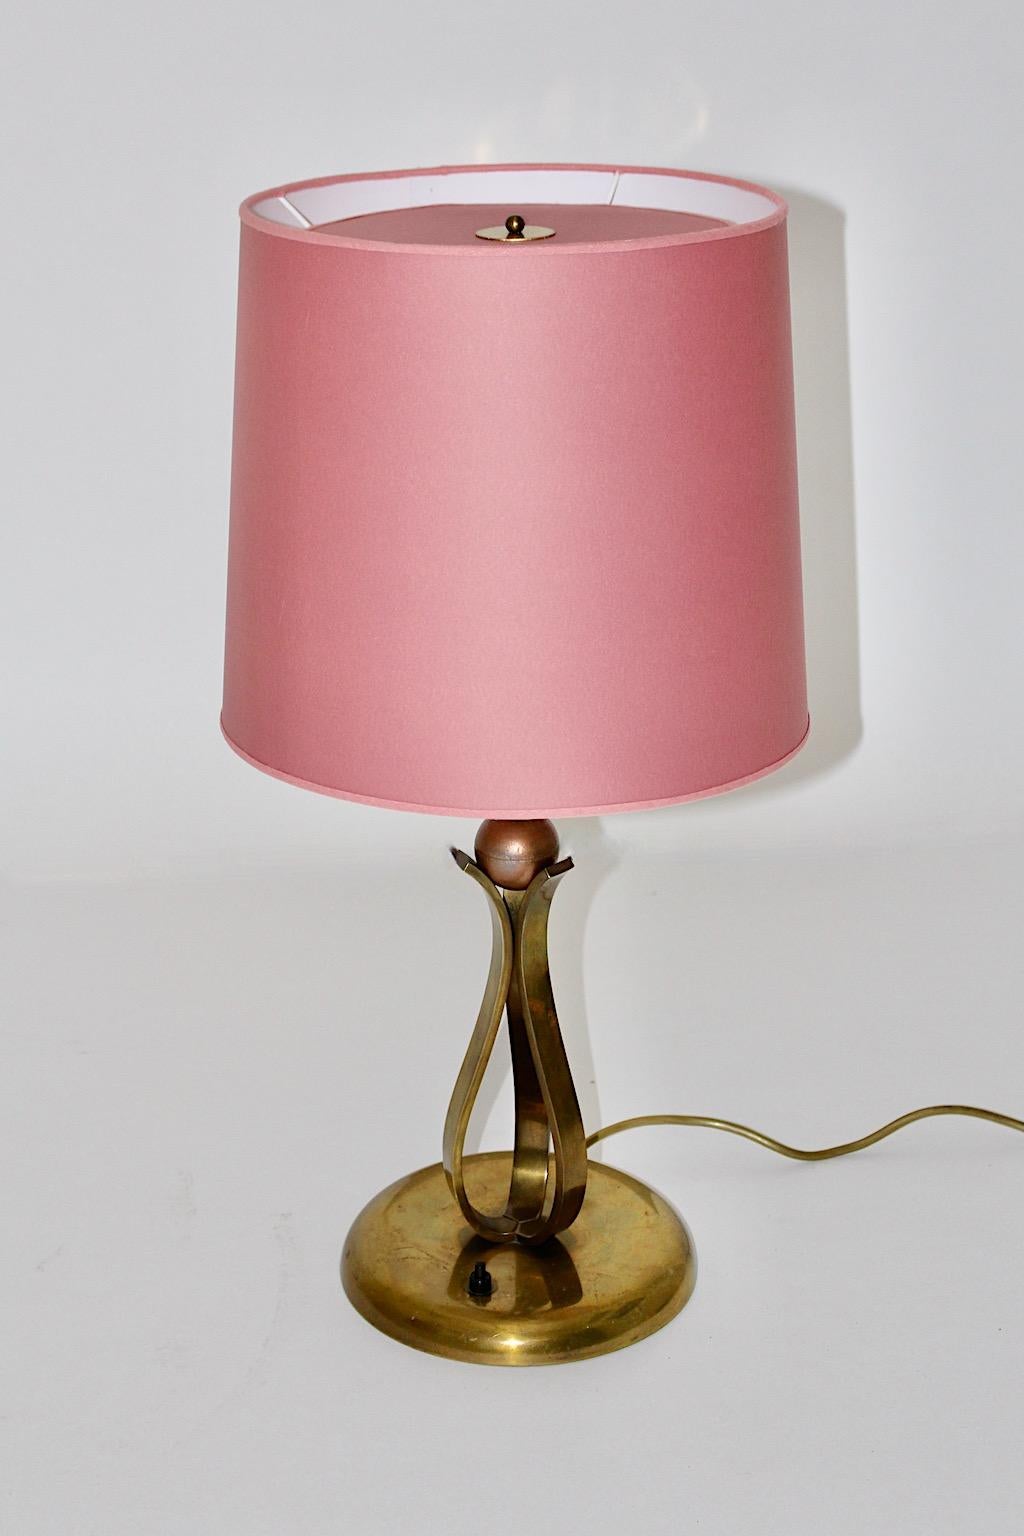 Art Deco Vintage Brass Copper Table Lamp Pink Shade 1930s Vienna For Sale 2